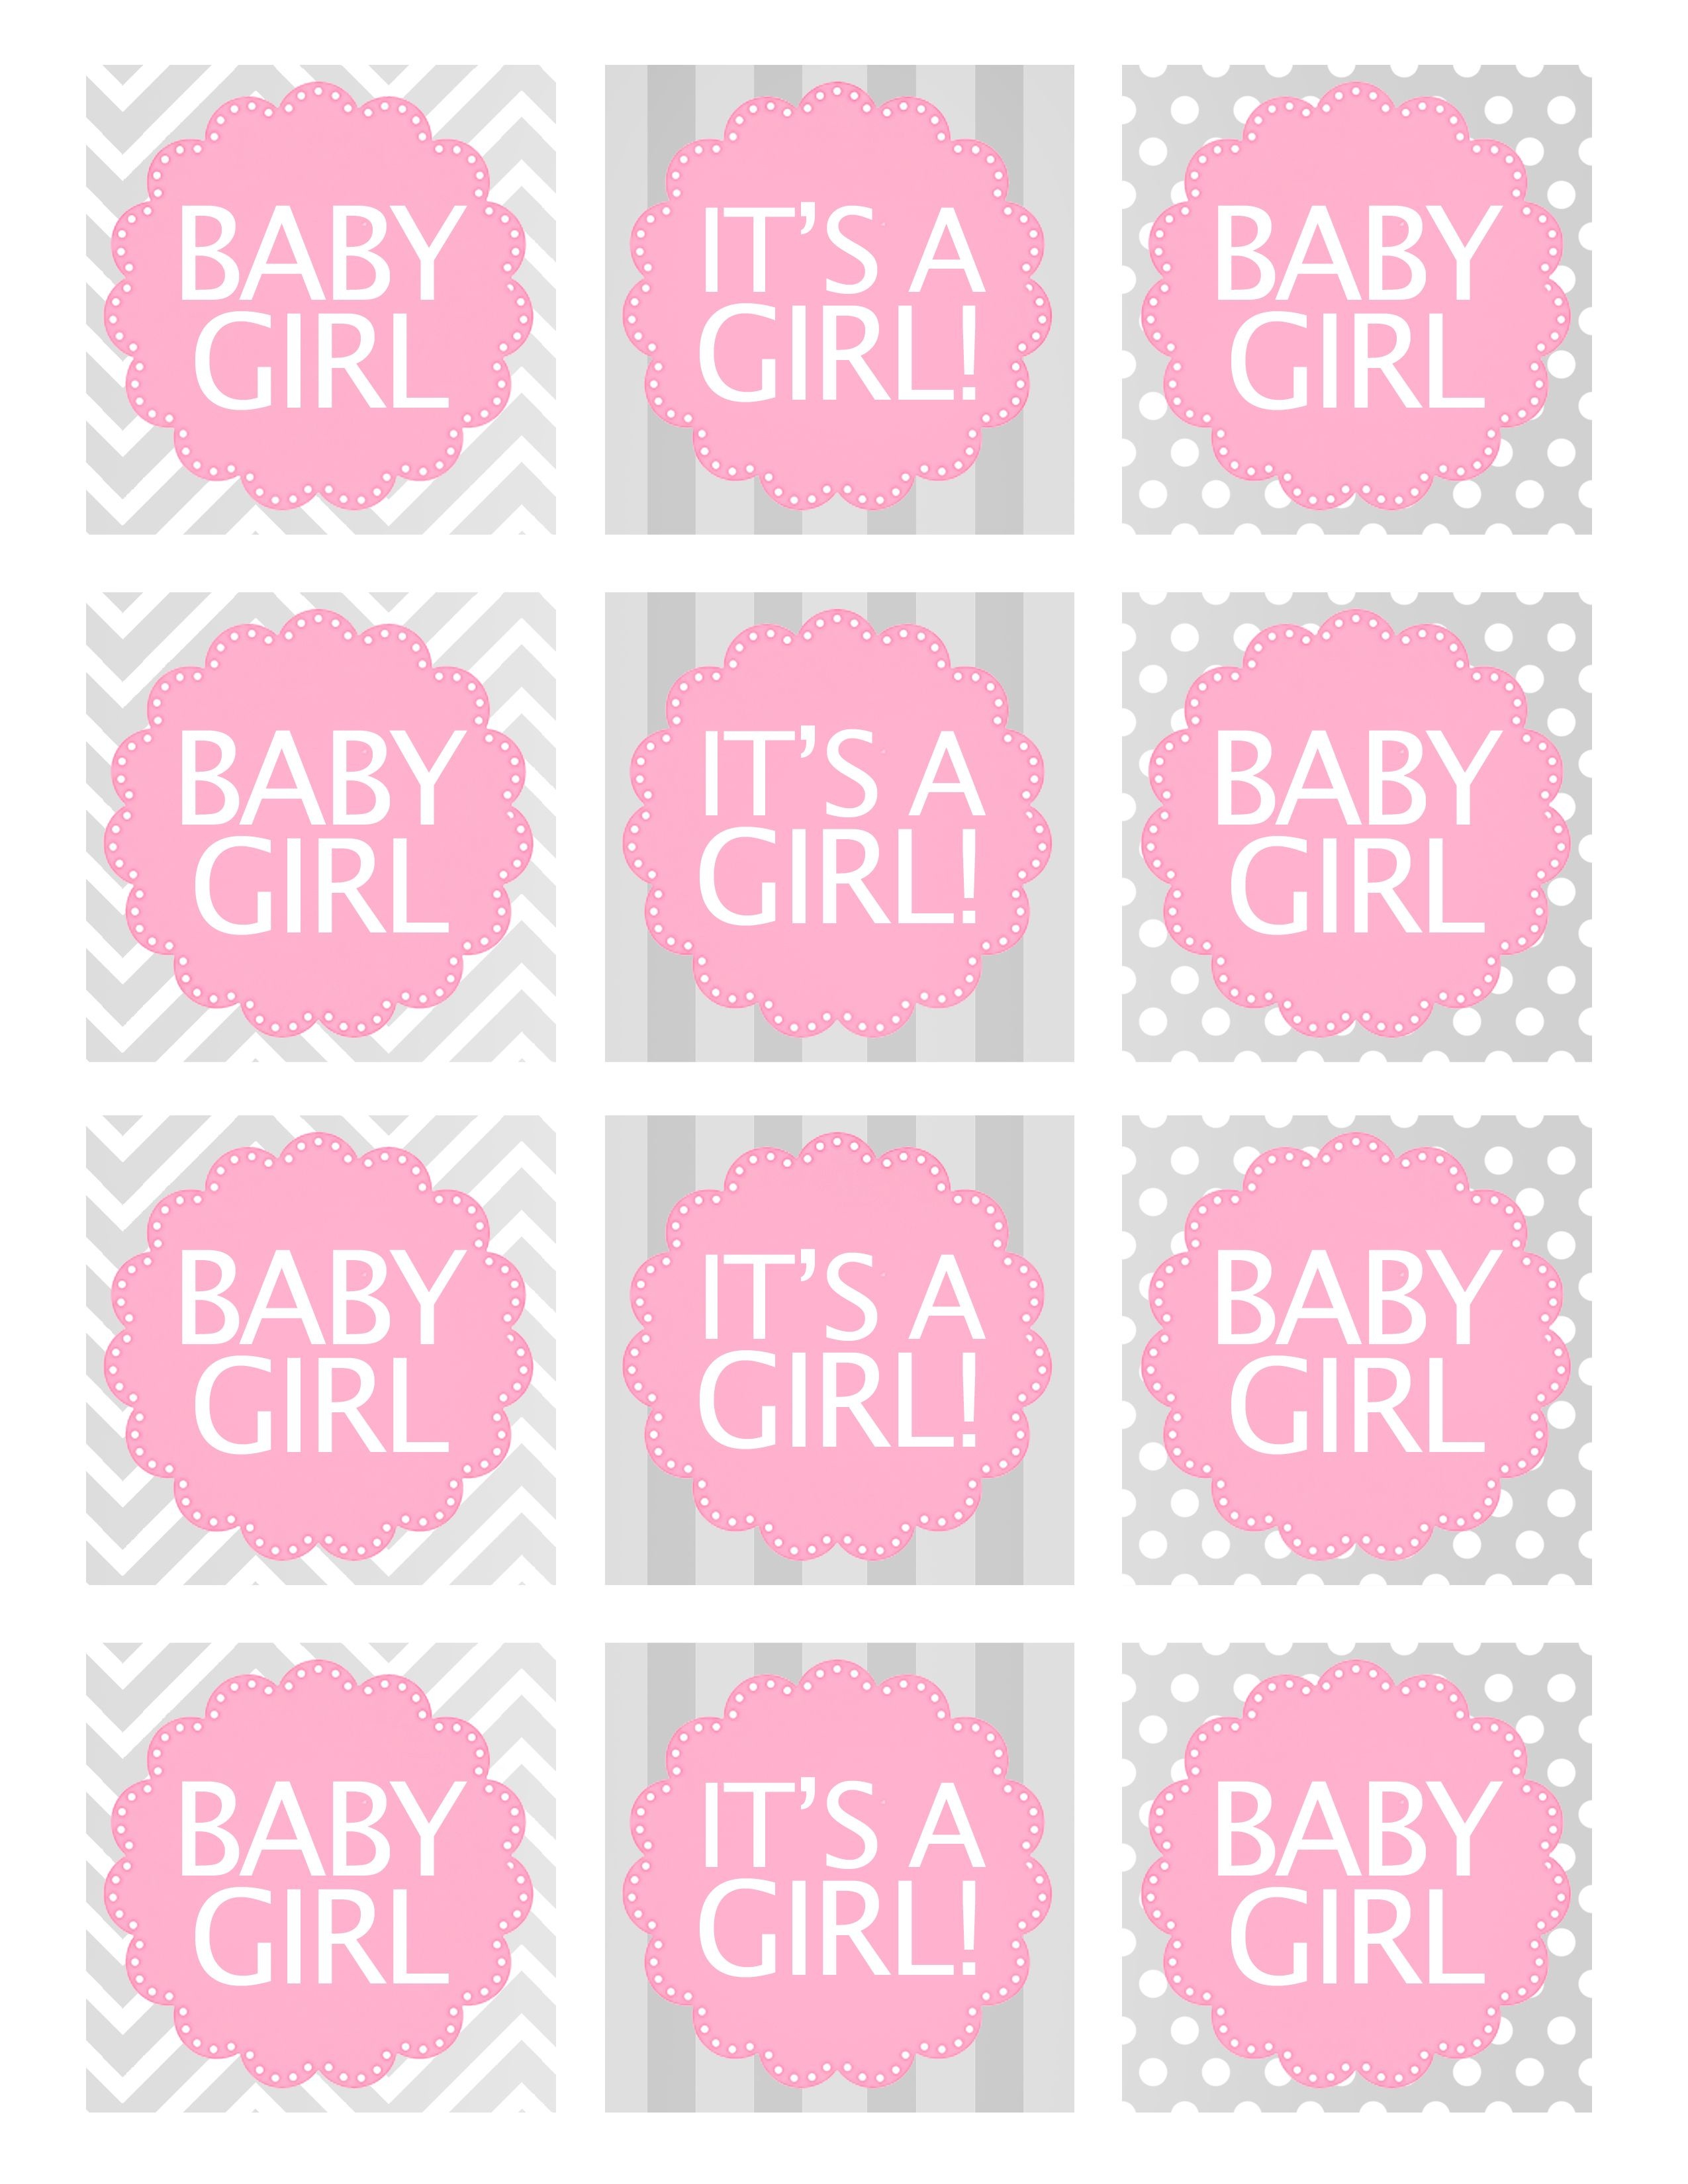 Baby Girl Shower Free Printables | Baby Shower Ideas | Baby Shower - Free Printable Baby Shower Labels And Tags